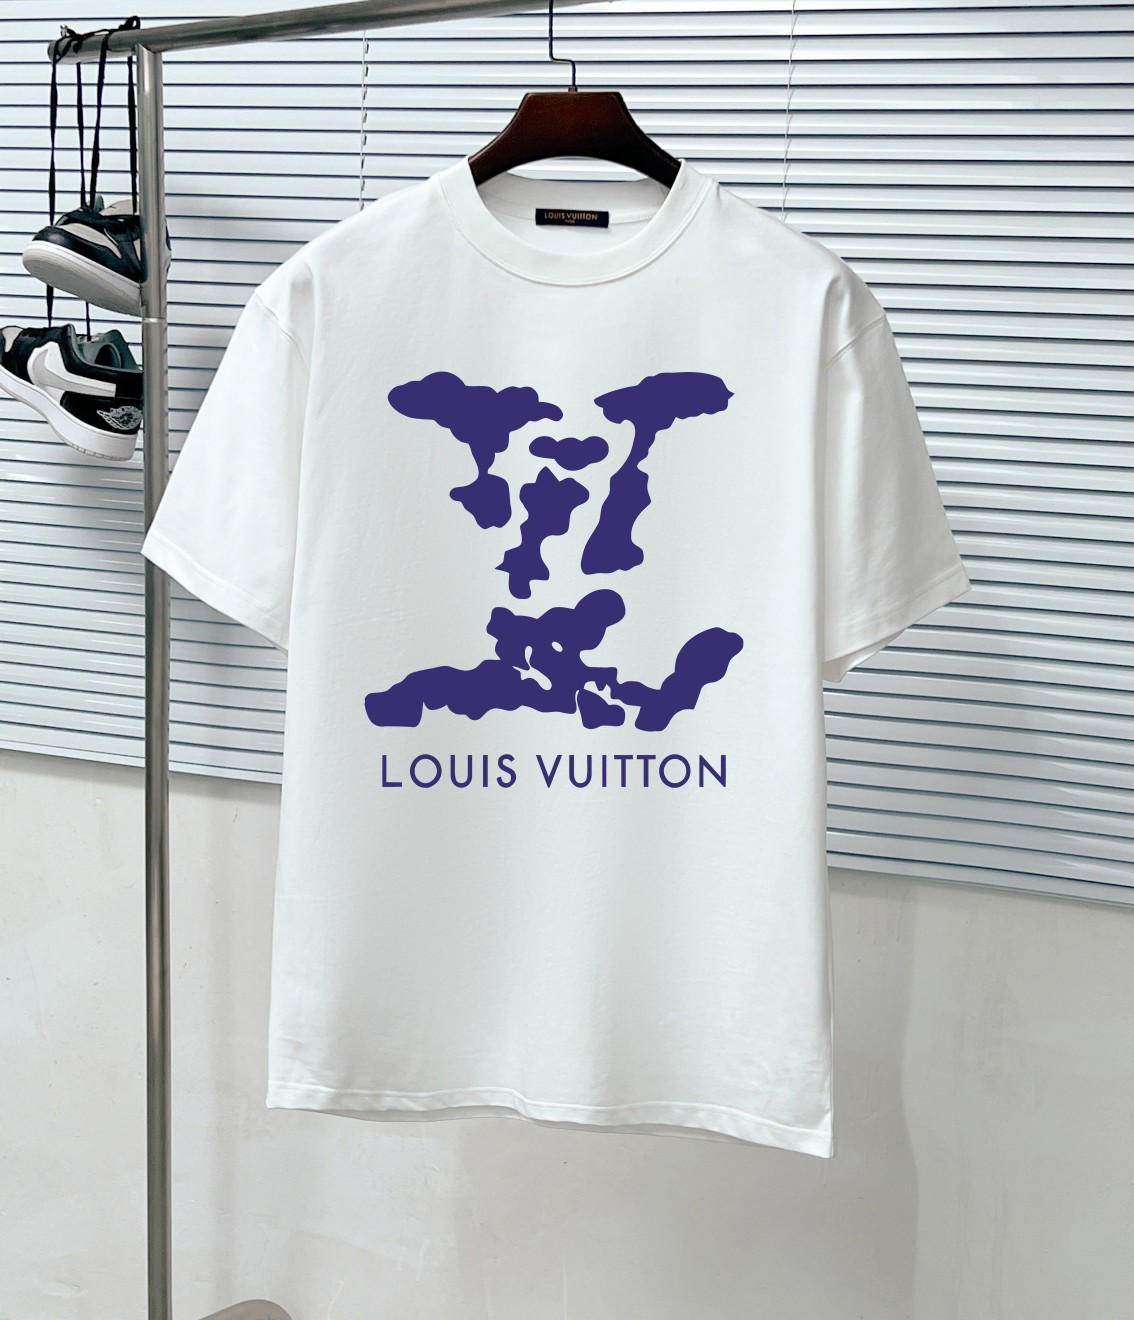 Buy
 Louis Vuitton Clothing T-Shirt Black White Printing Unisex Cotton Spring/Summer Collection Fashion Short Sleeve